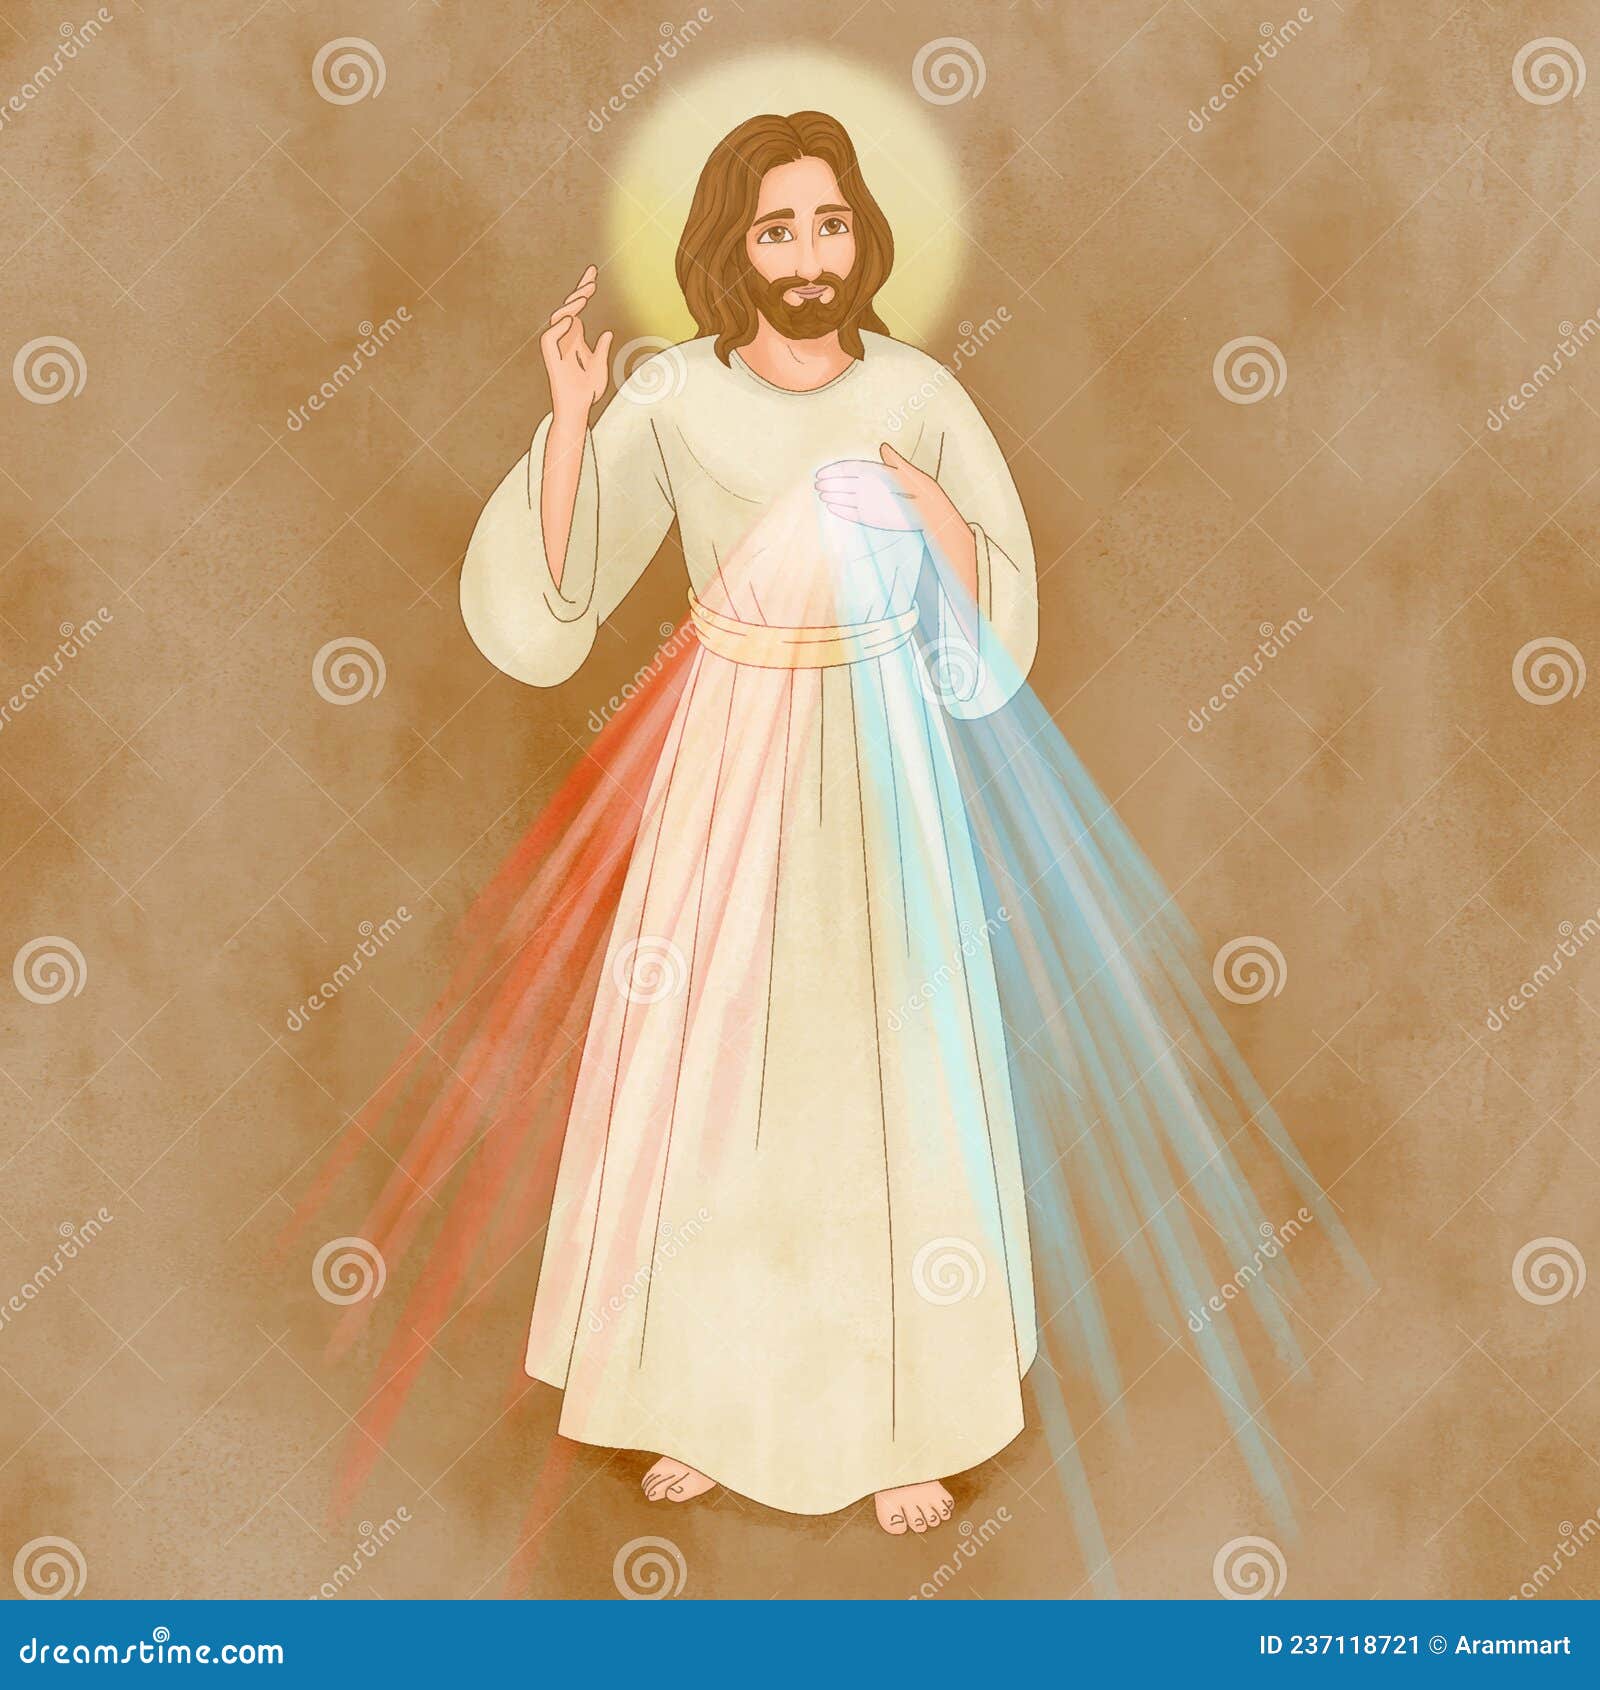 divine mercy of jesus character, rays of light are emanating from her sacred heart